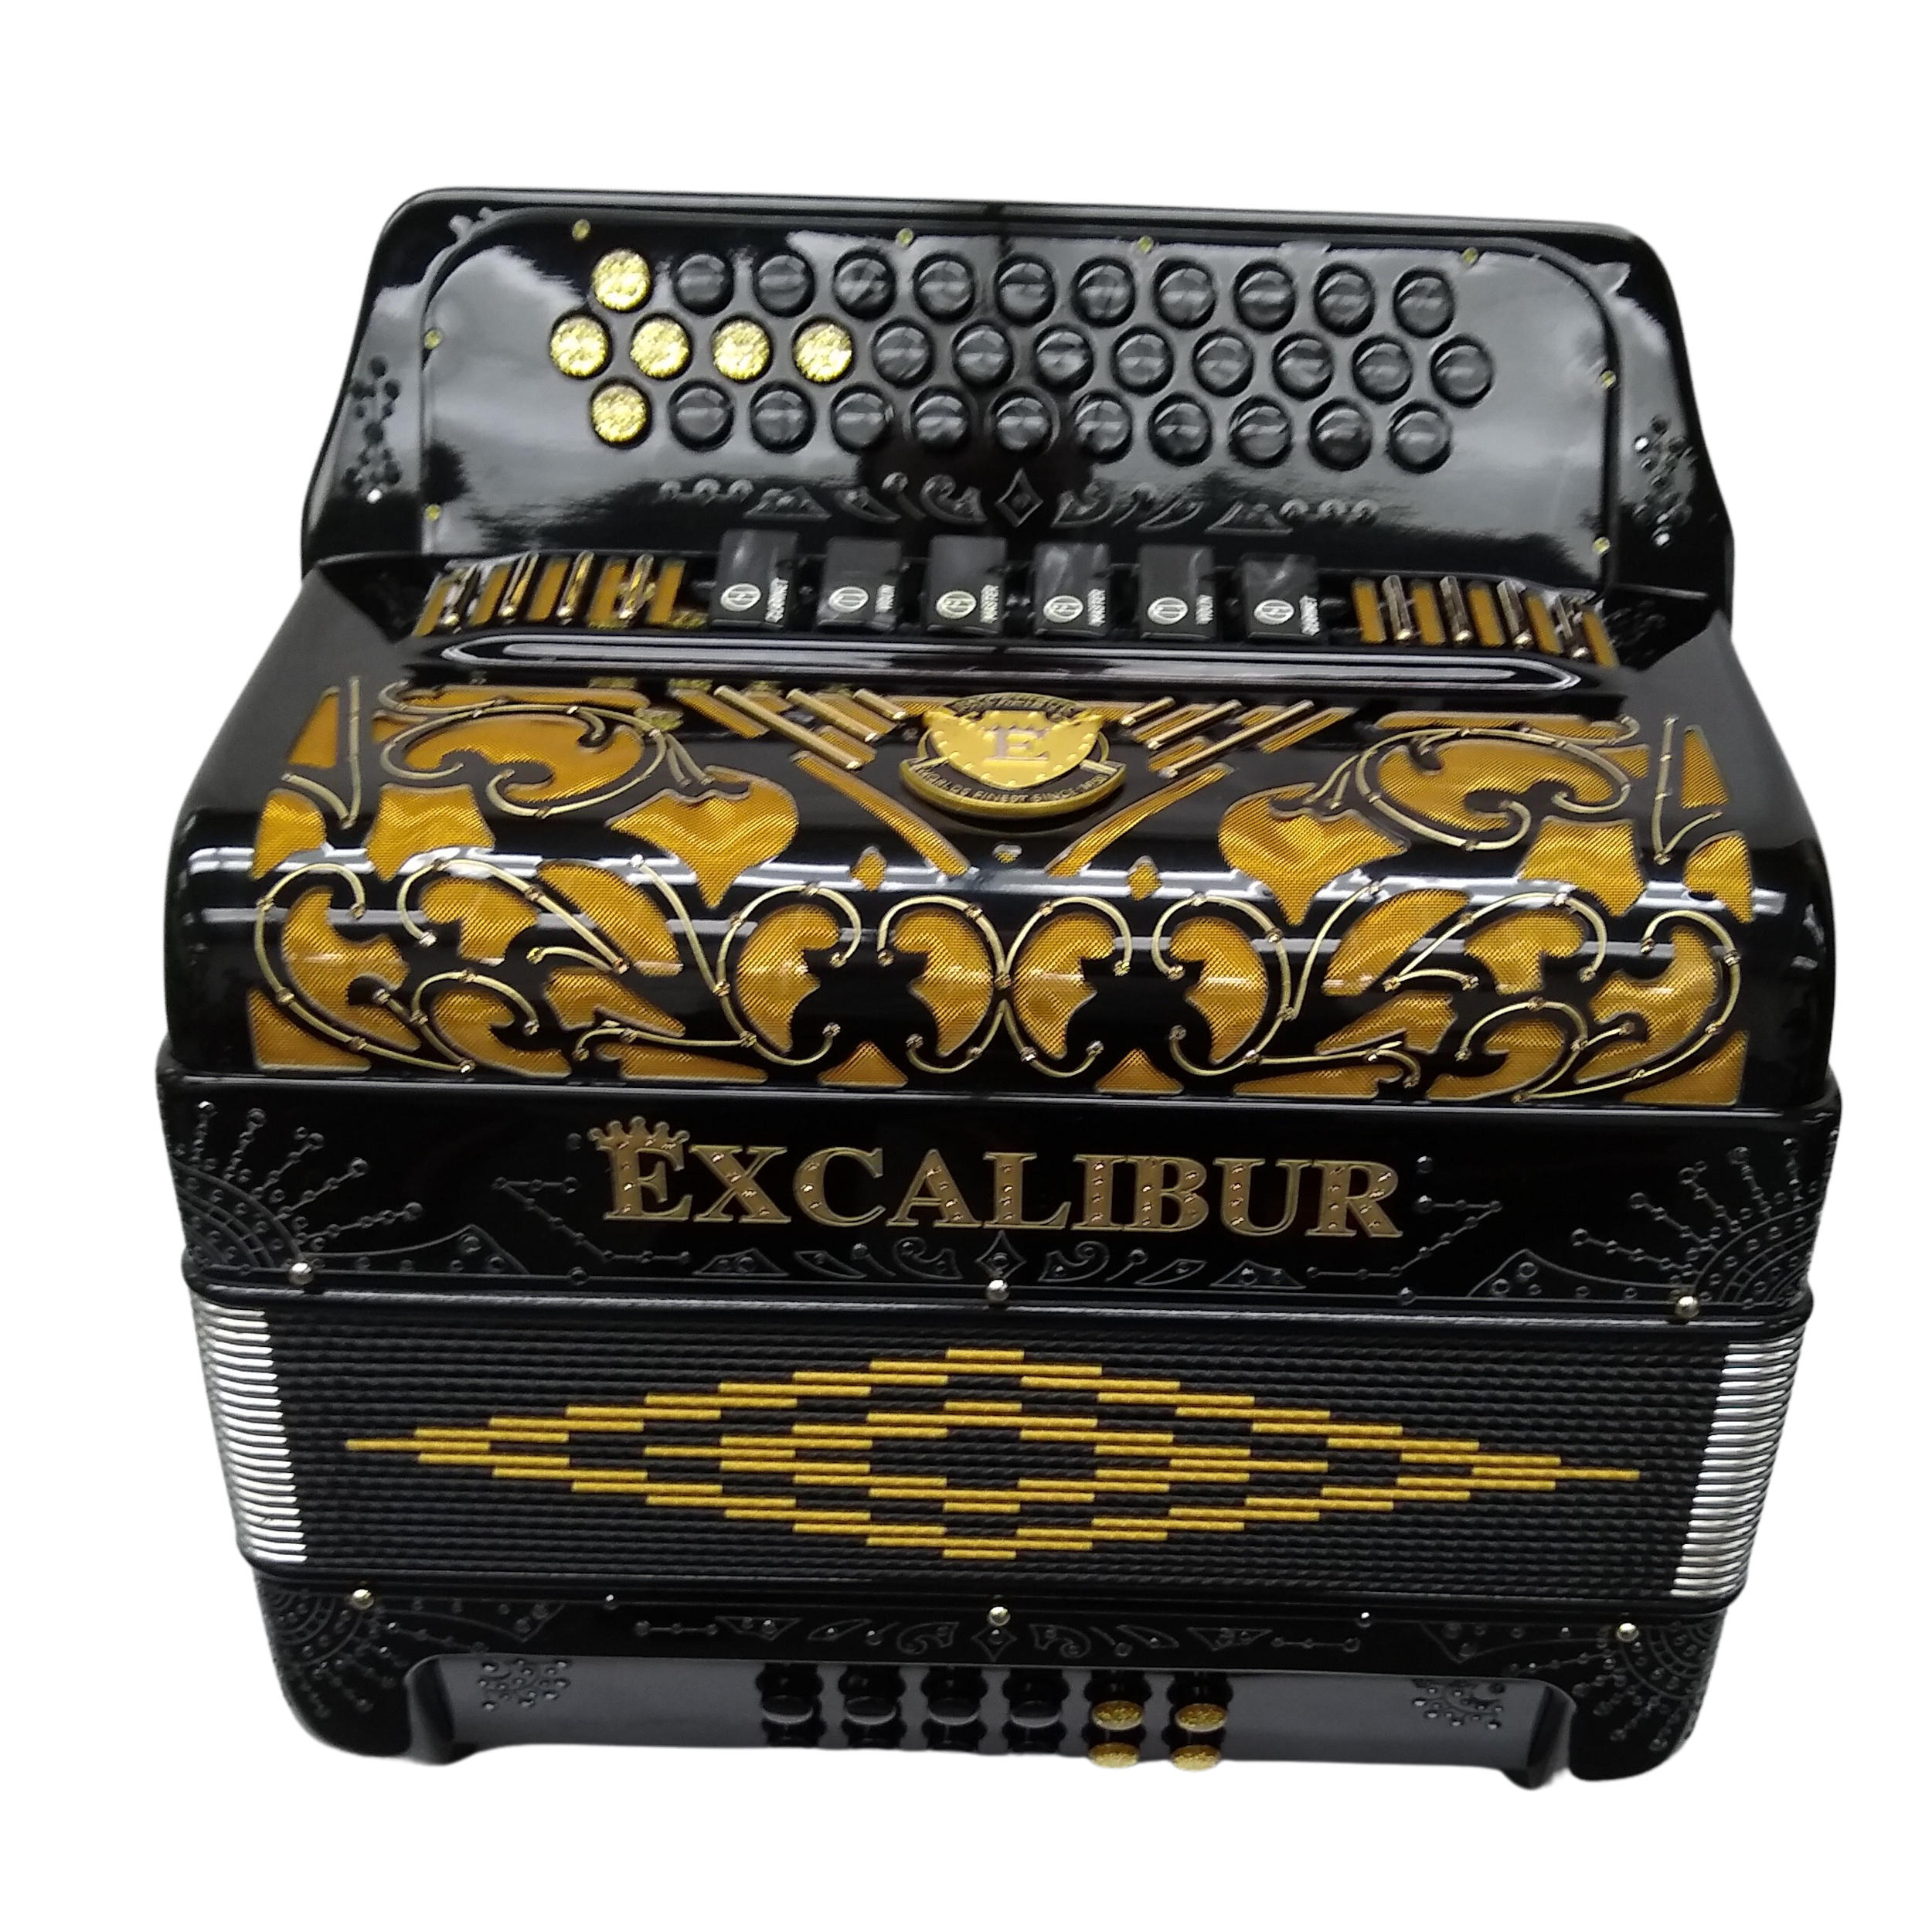 Excalibur Crown Series Button Accordion Two Tone 6 Switch Black & Gold